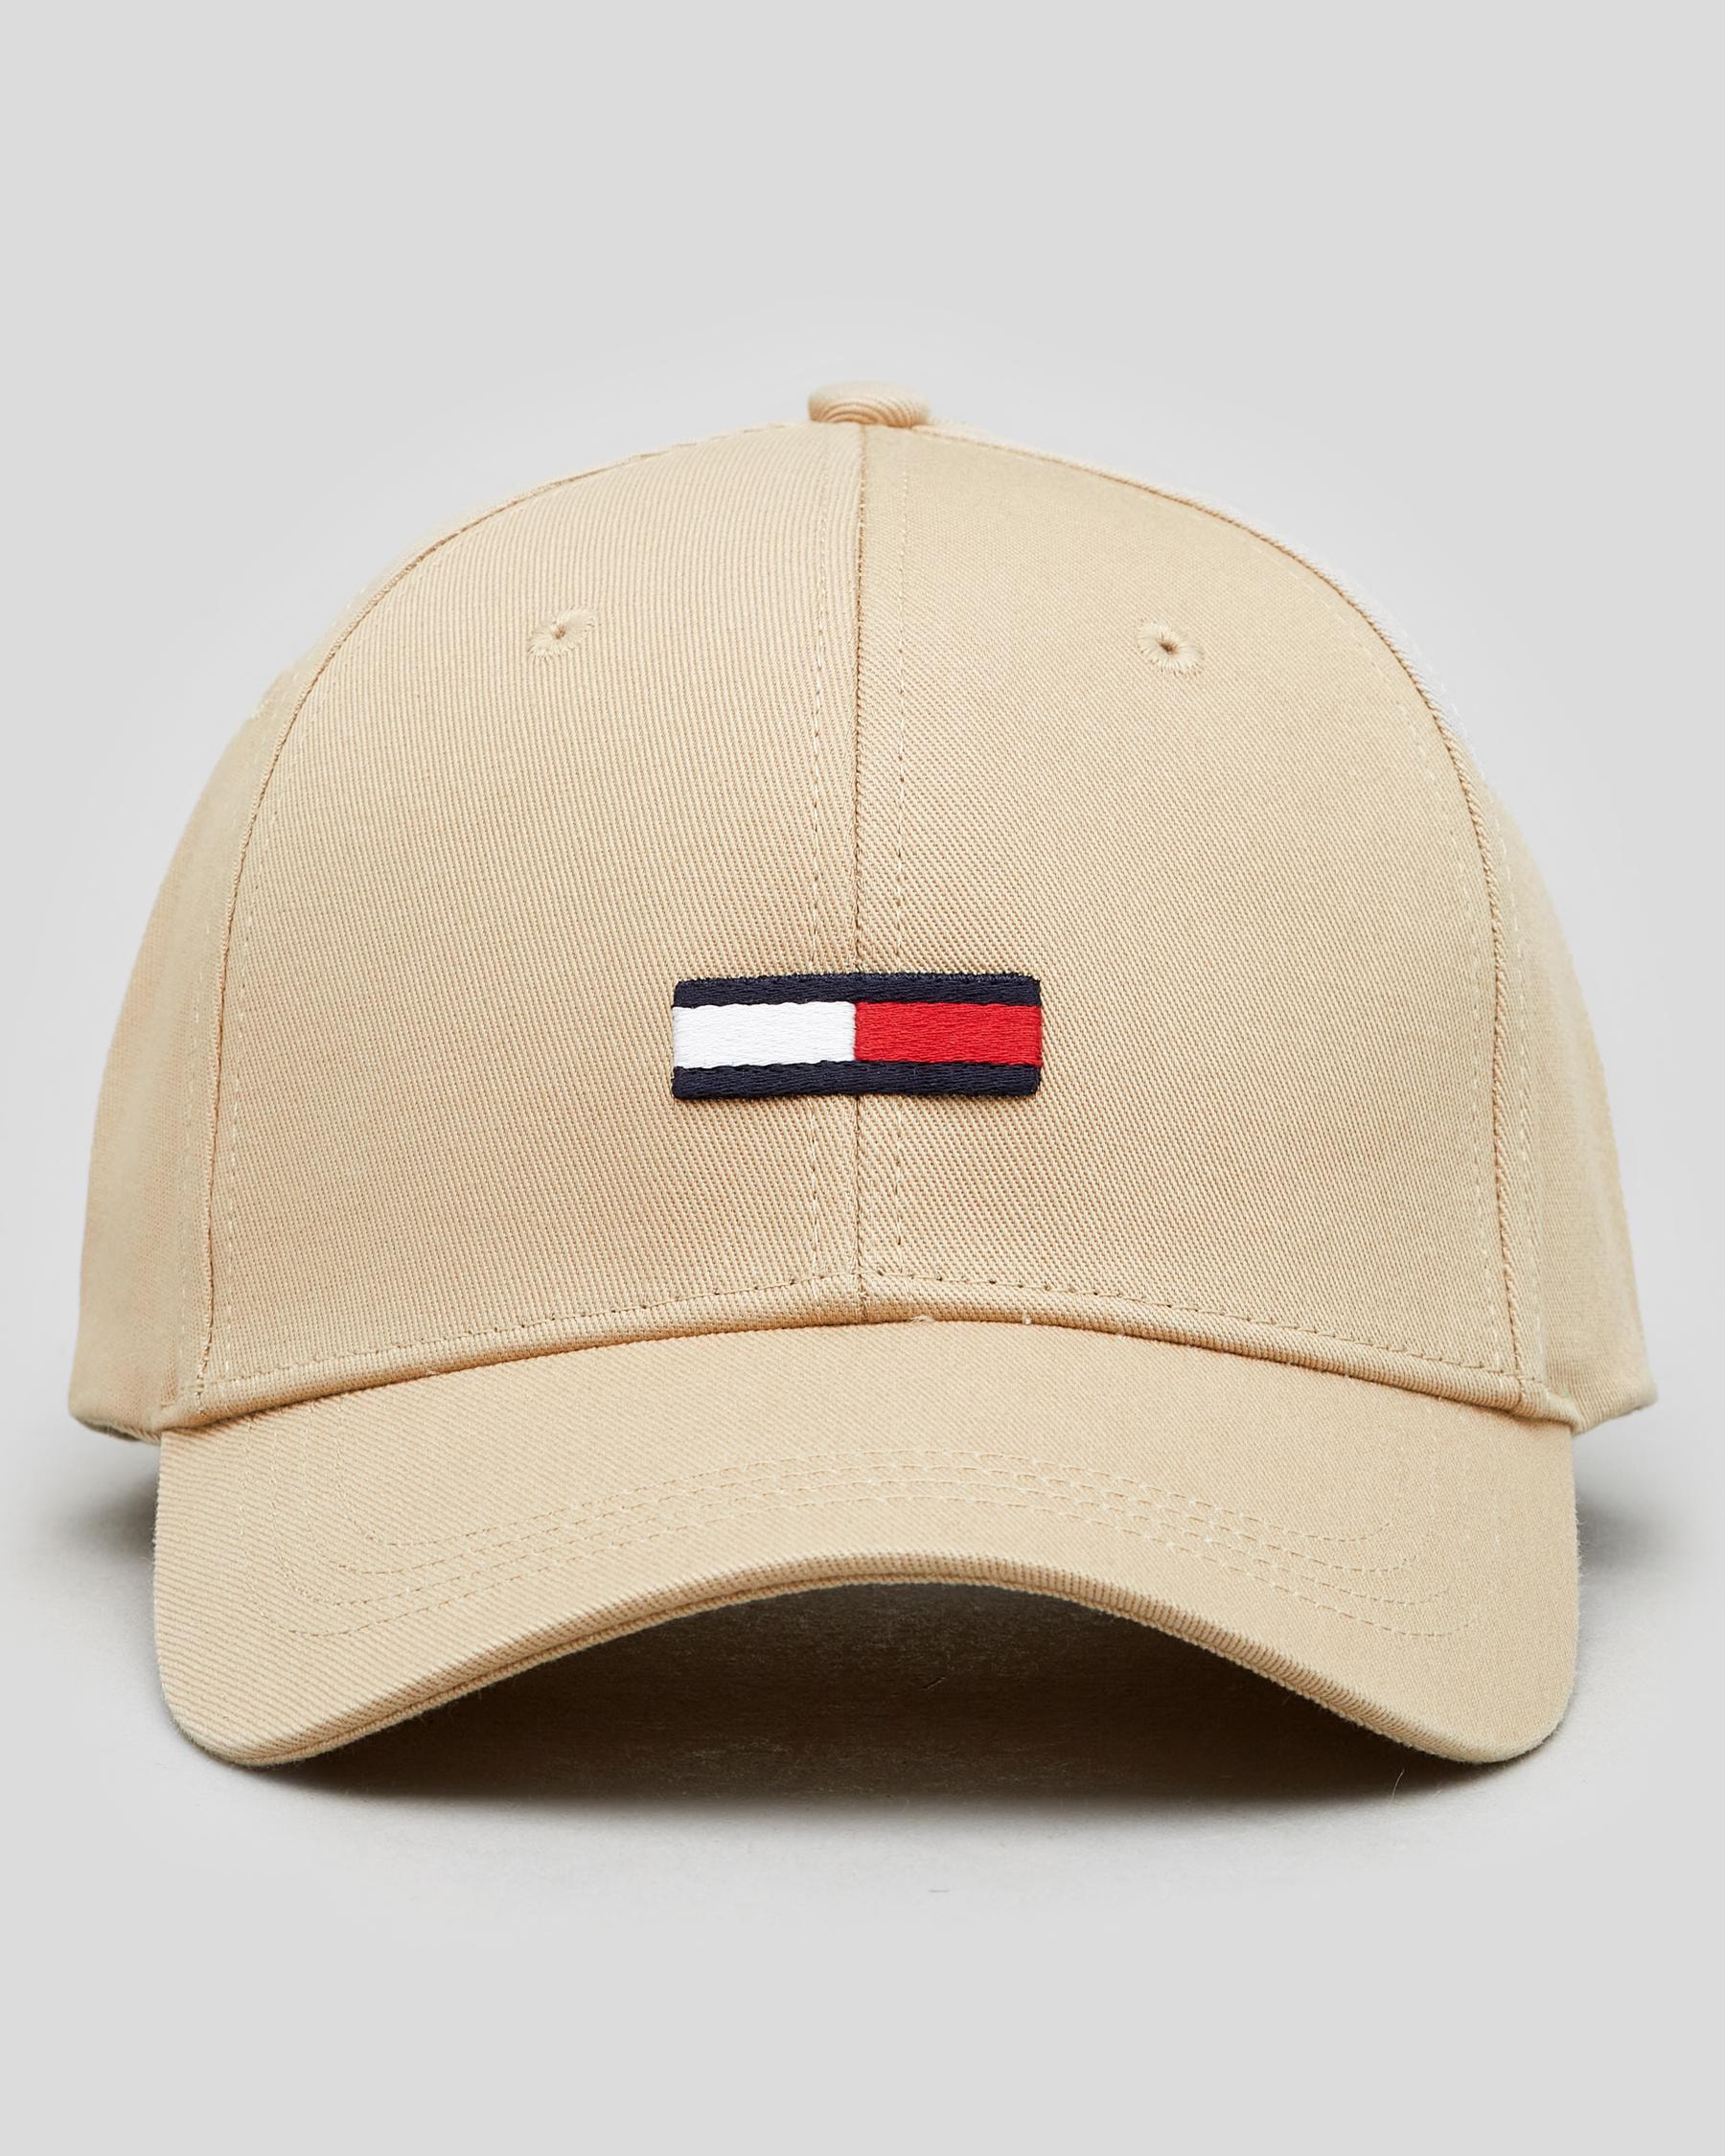 - Shipping & Soft - In Cap Beach United FREE* Flag Beige Easy States City TJM Returns Tommy Hilfiger